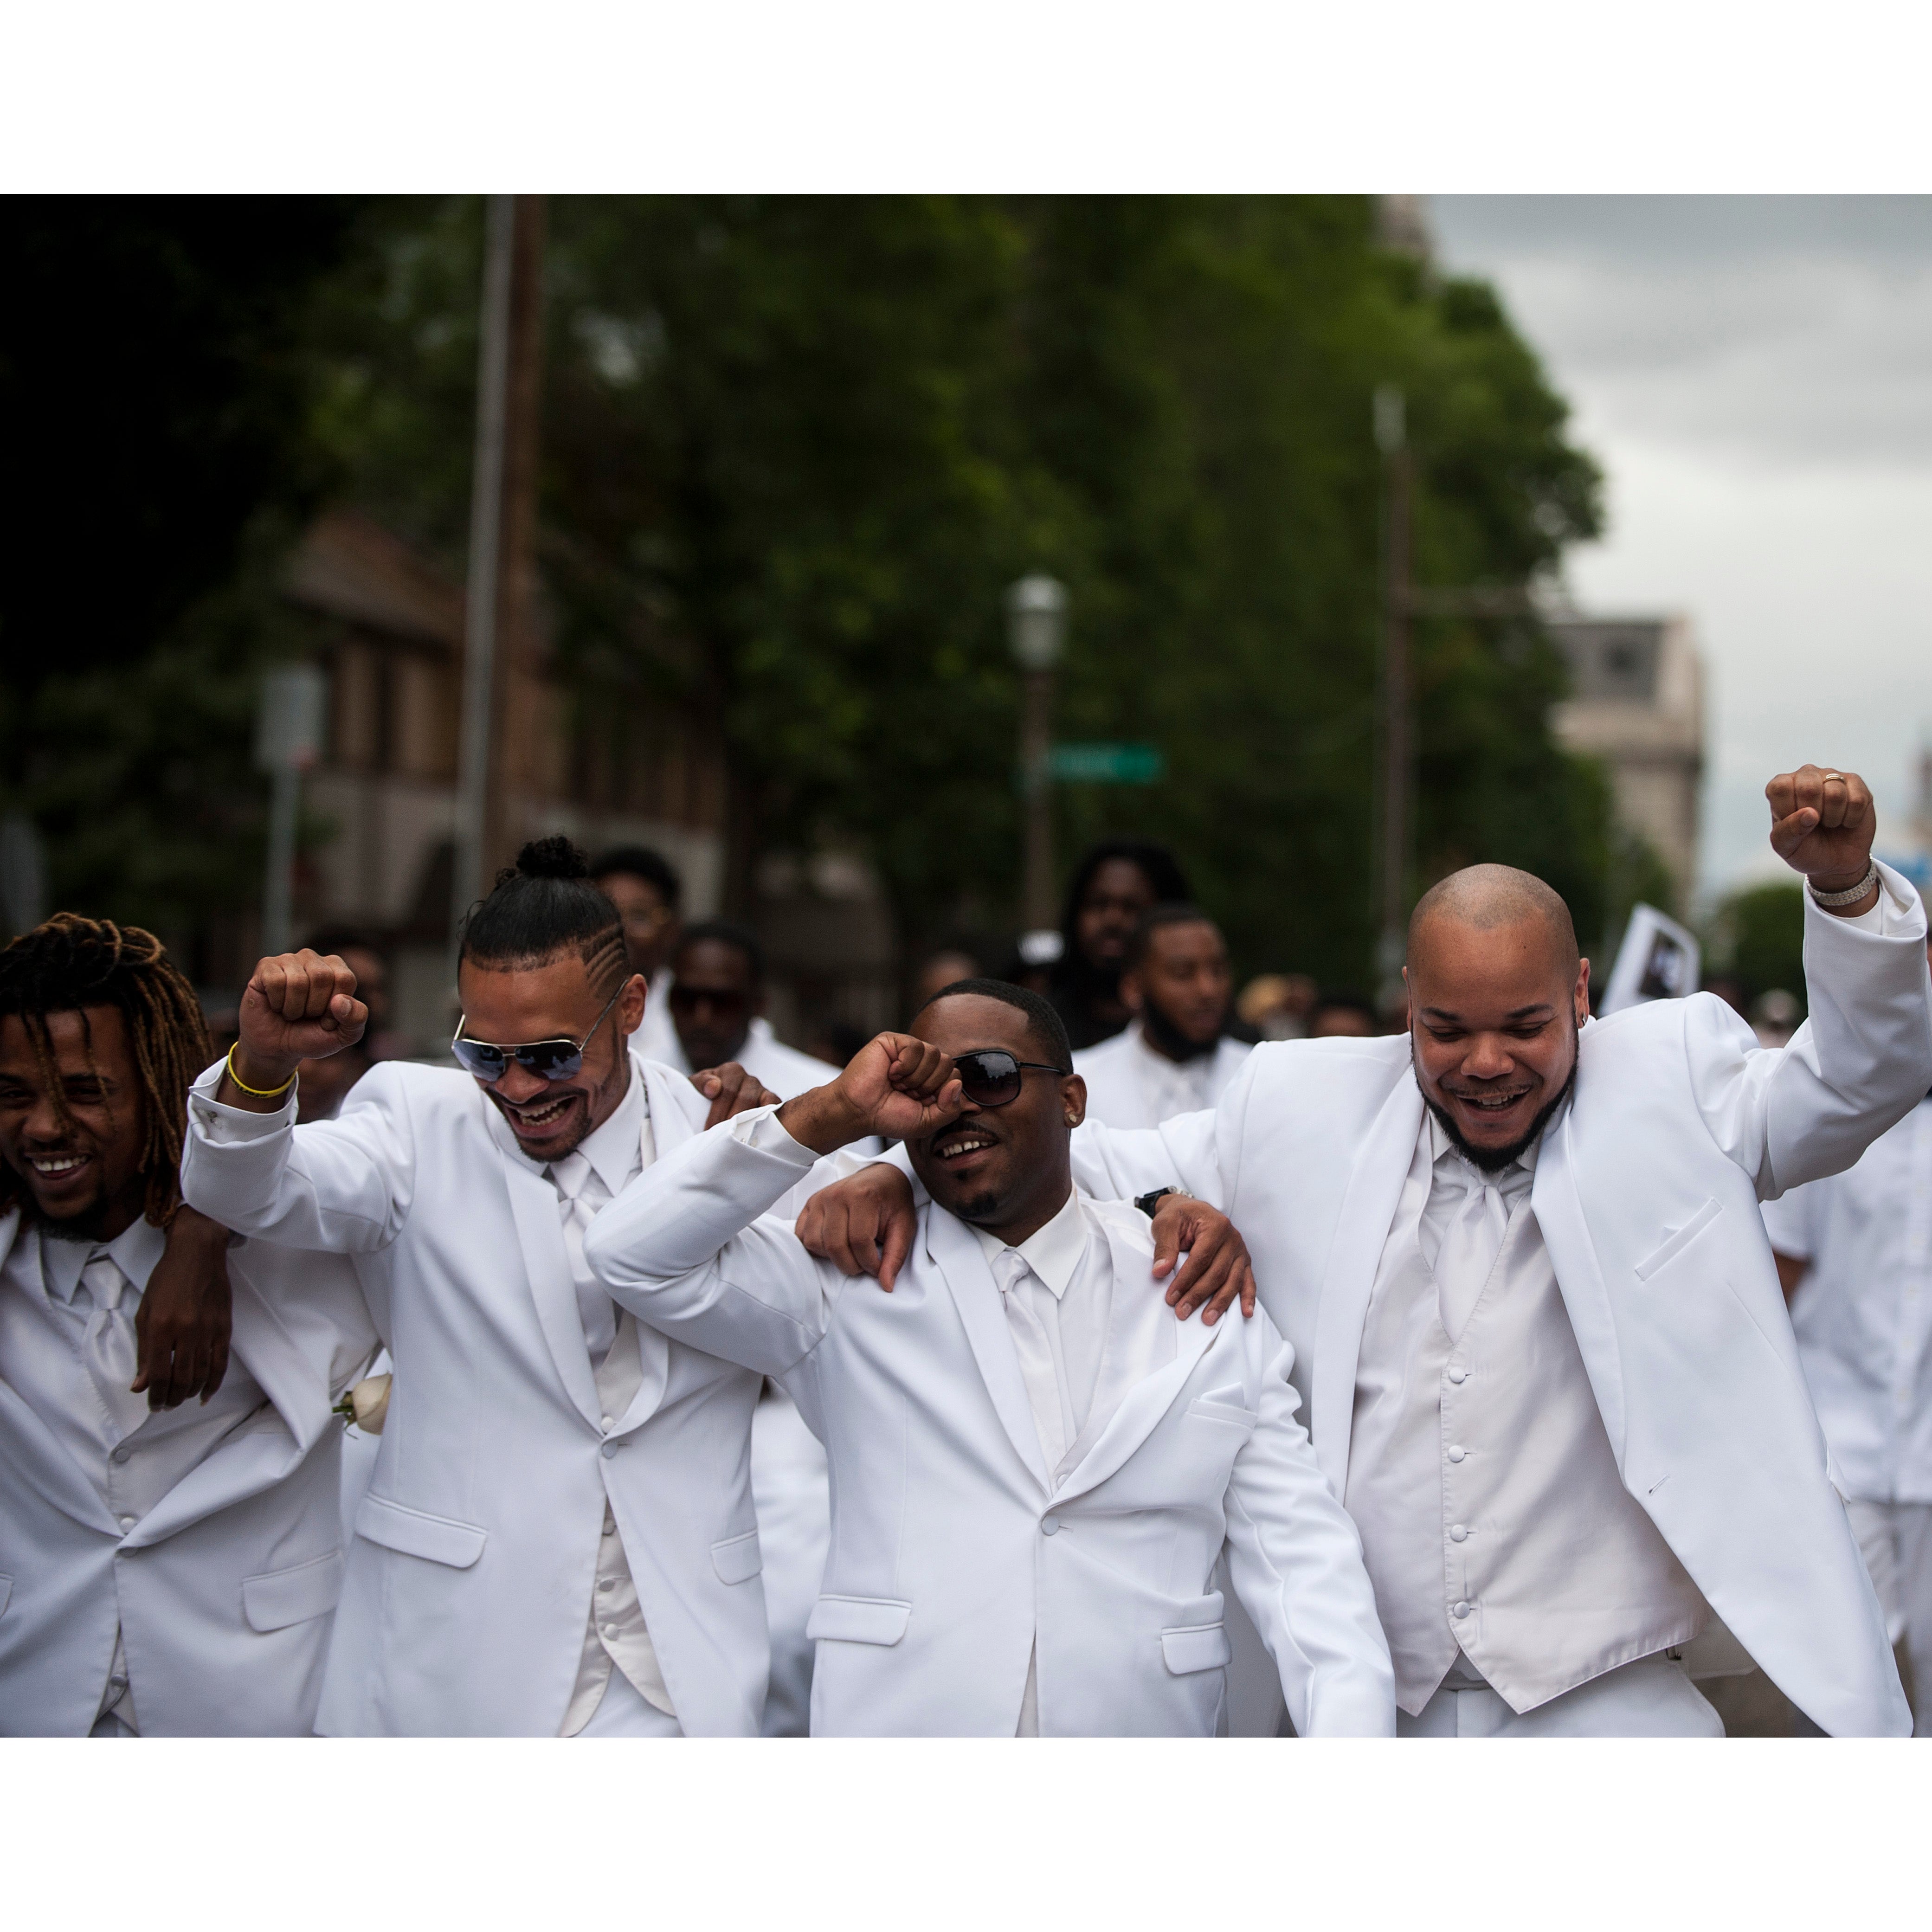 Philando Castile Was Laid to Rest With A Beautiful Procession and An All-White March